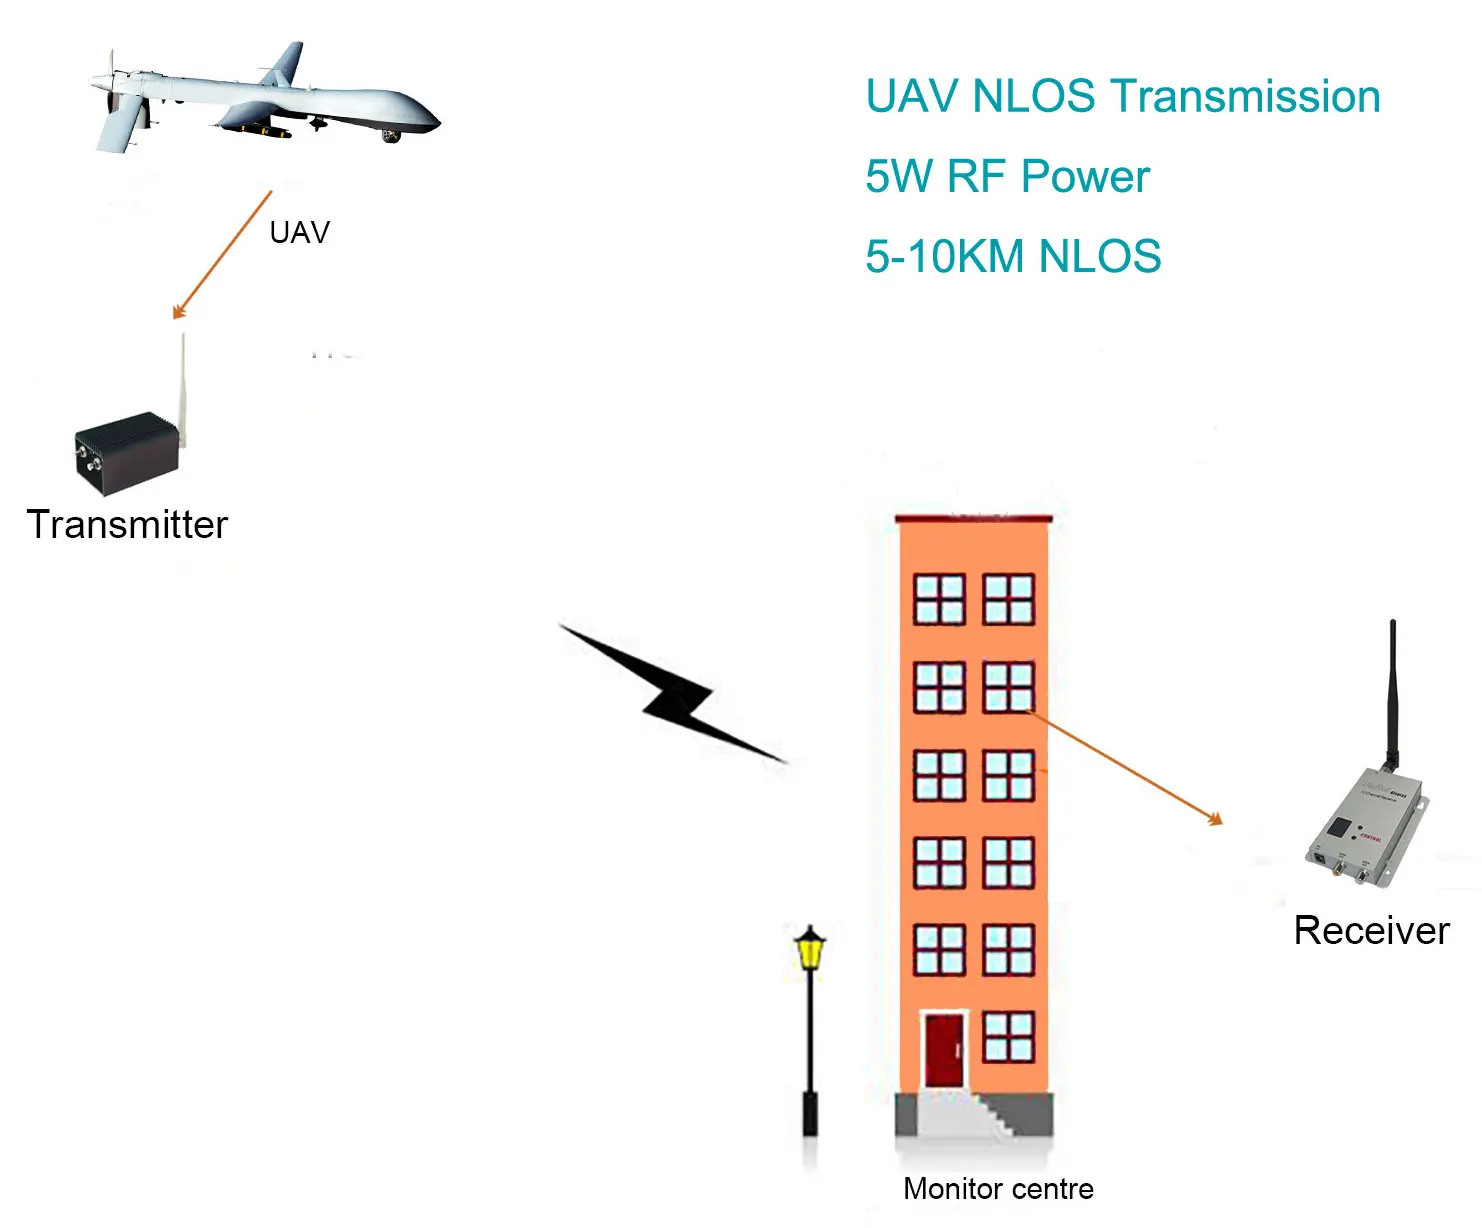 1.2GHz 10KM FPV Long Range Wireless Video Analog Transmitter with 5000mW, 8 Channels Camera Drones Accessories